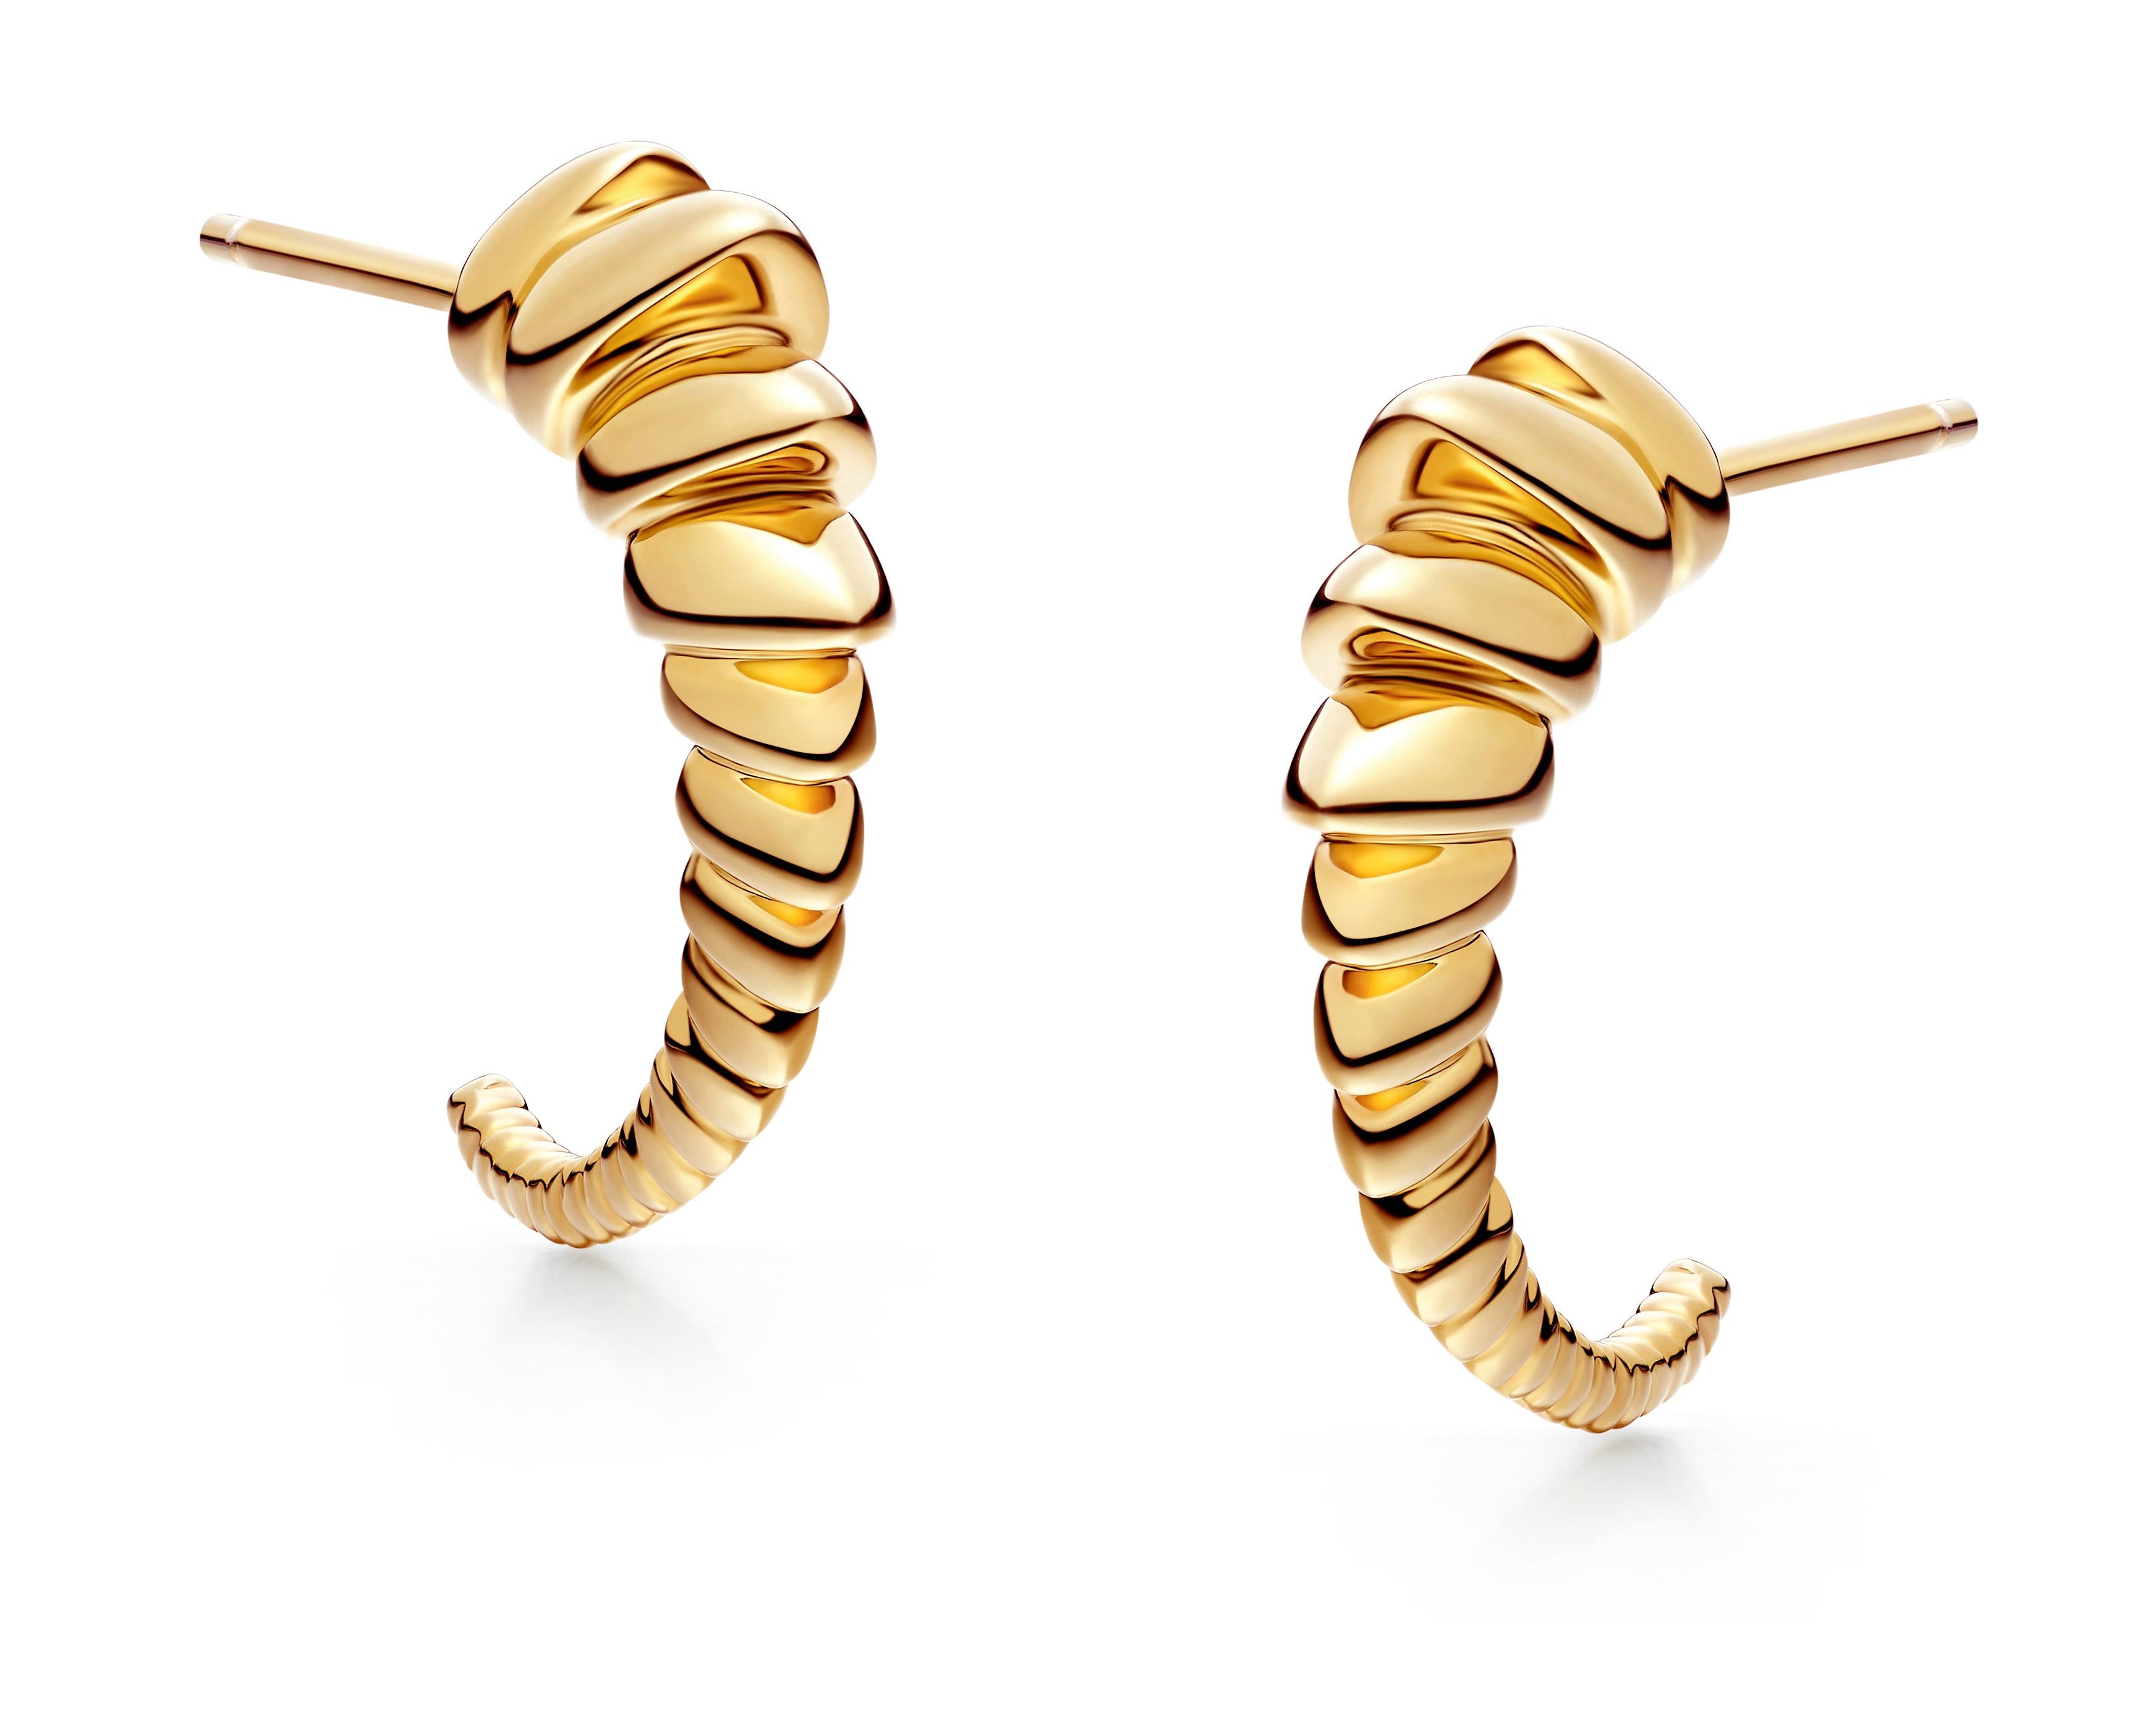 18K gold suite from our Nova 02 Collection. The beautifully segmented designs highlight bold characteristics. 